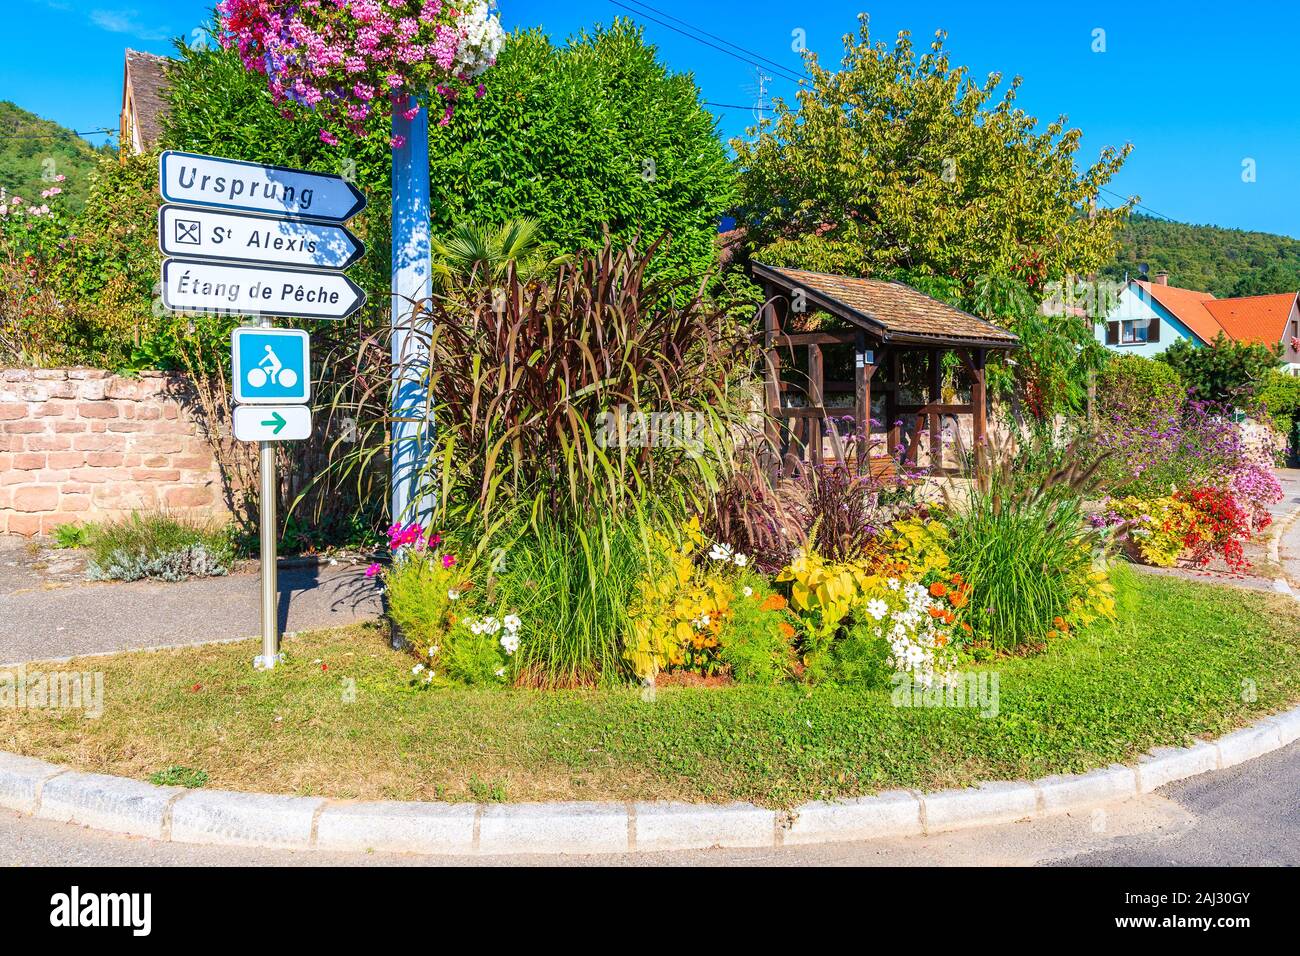 RIQUEWIHR, FRANCE - SEP 18, 2019: Sign with cycling directions and place names on Alsatian Wine Route in Riquewihr village, France. Stock Photo